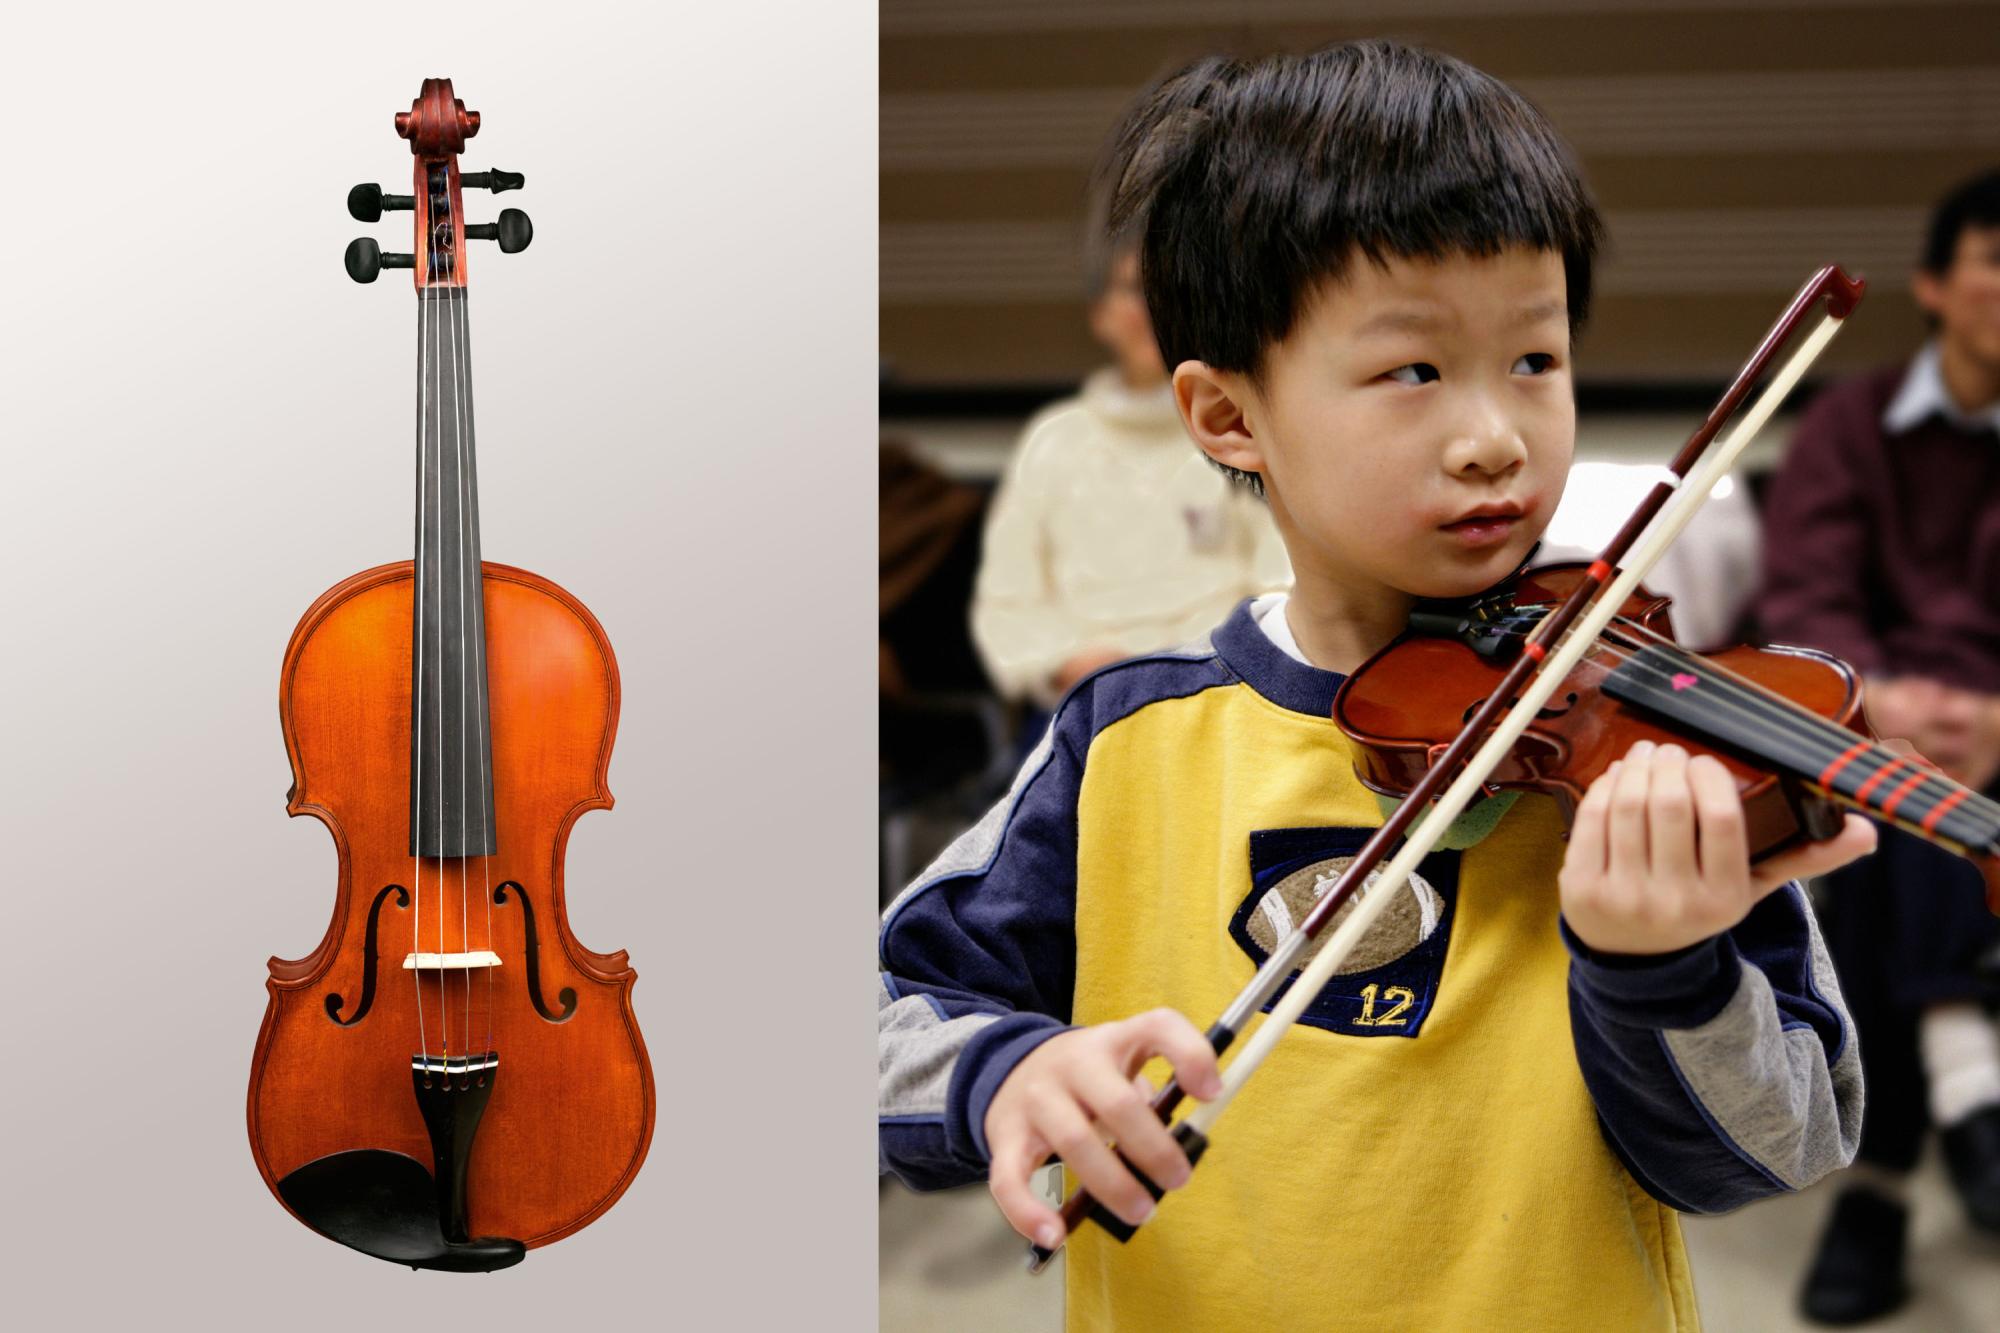 a side-by-side view of a full size violin alone, and a child playing a small child's violin